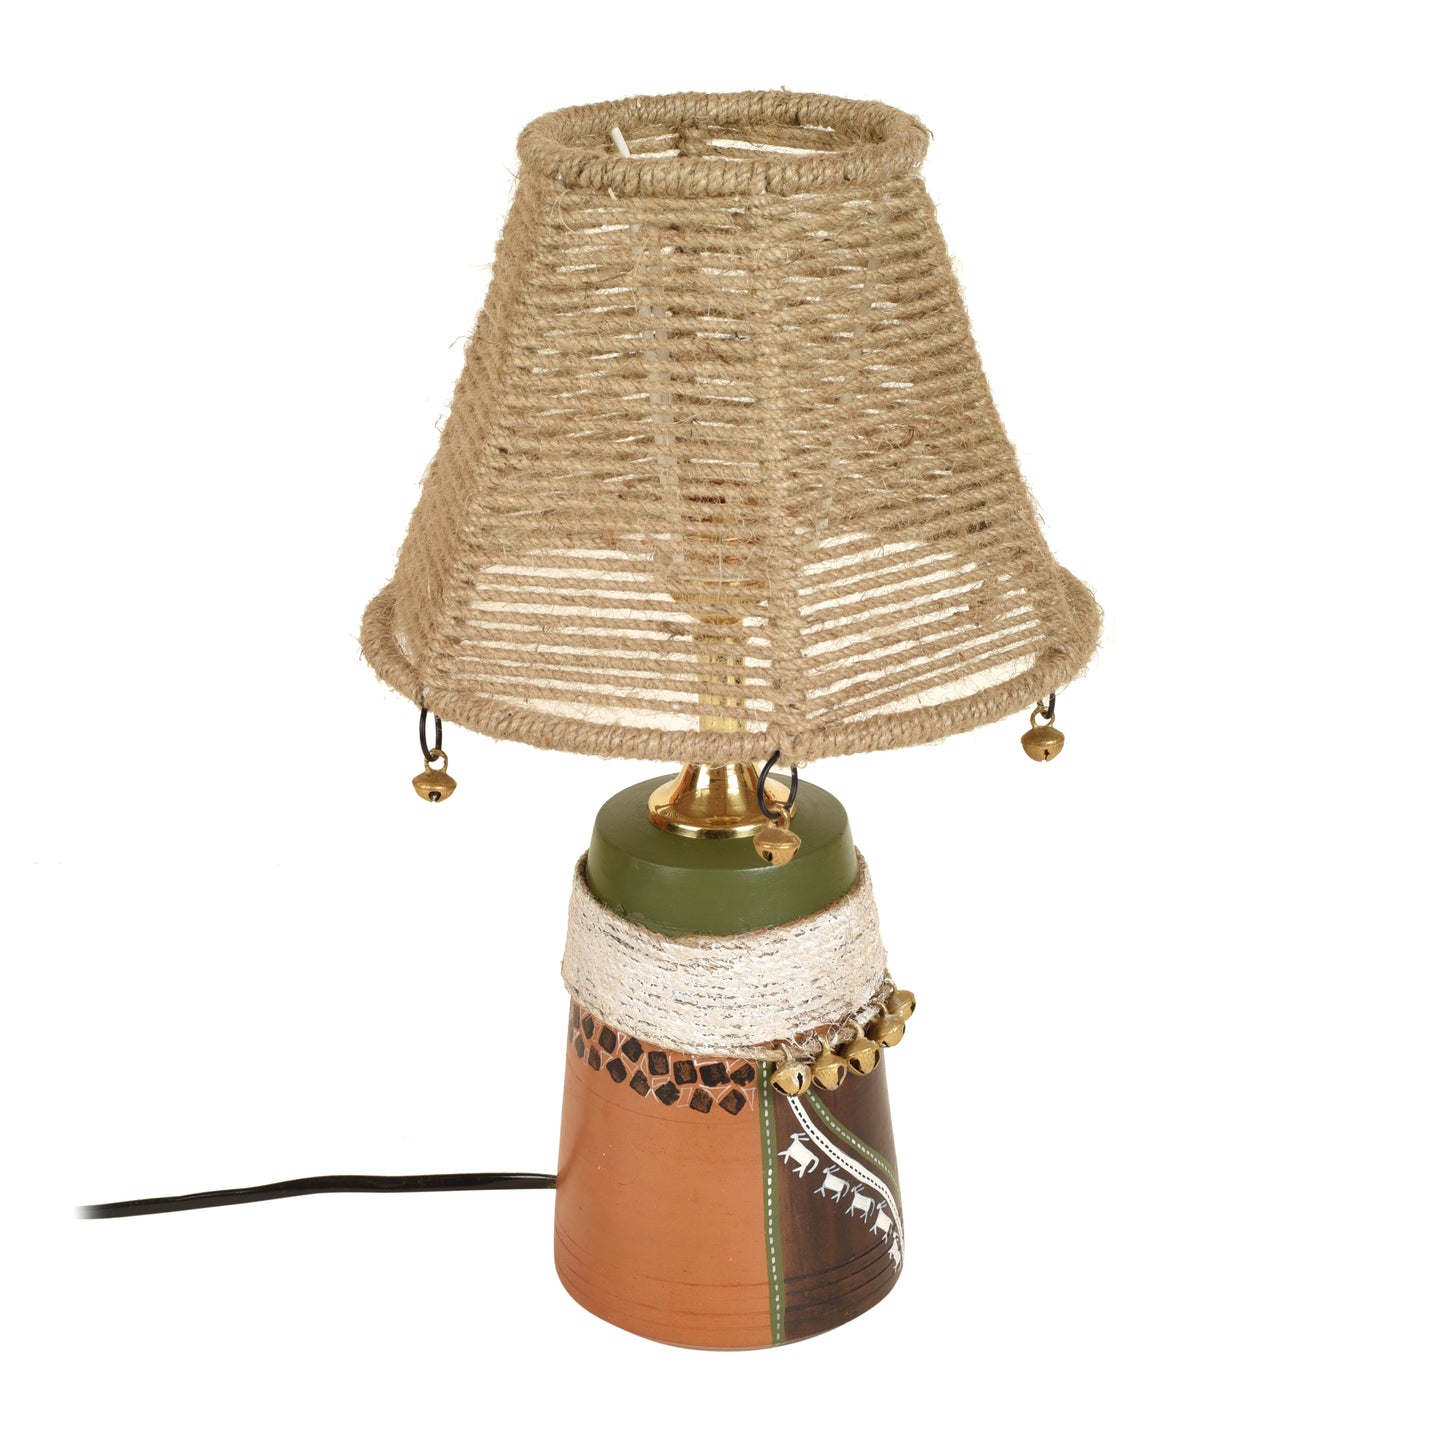 Hand Knitted Earthen Lamp with embellished Jute Shade (16x4.5")